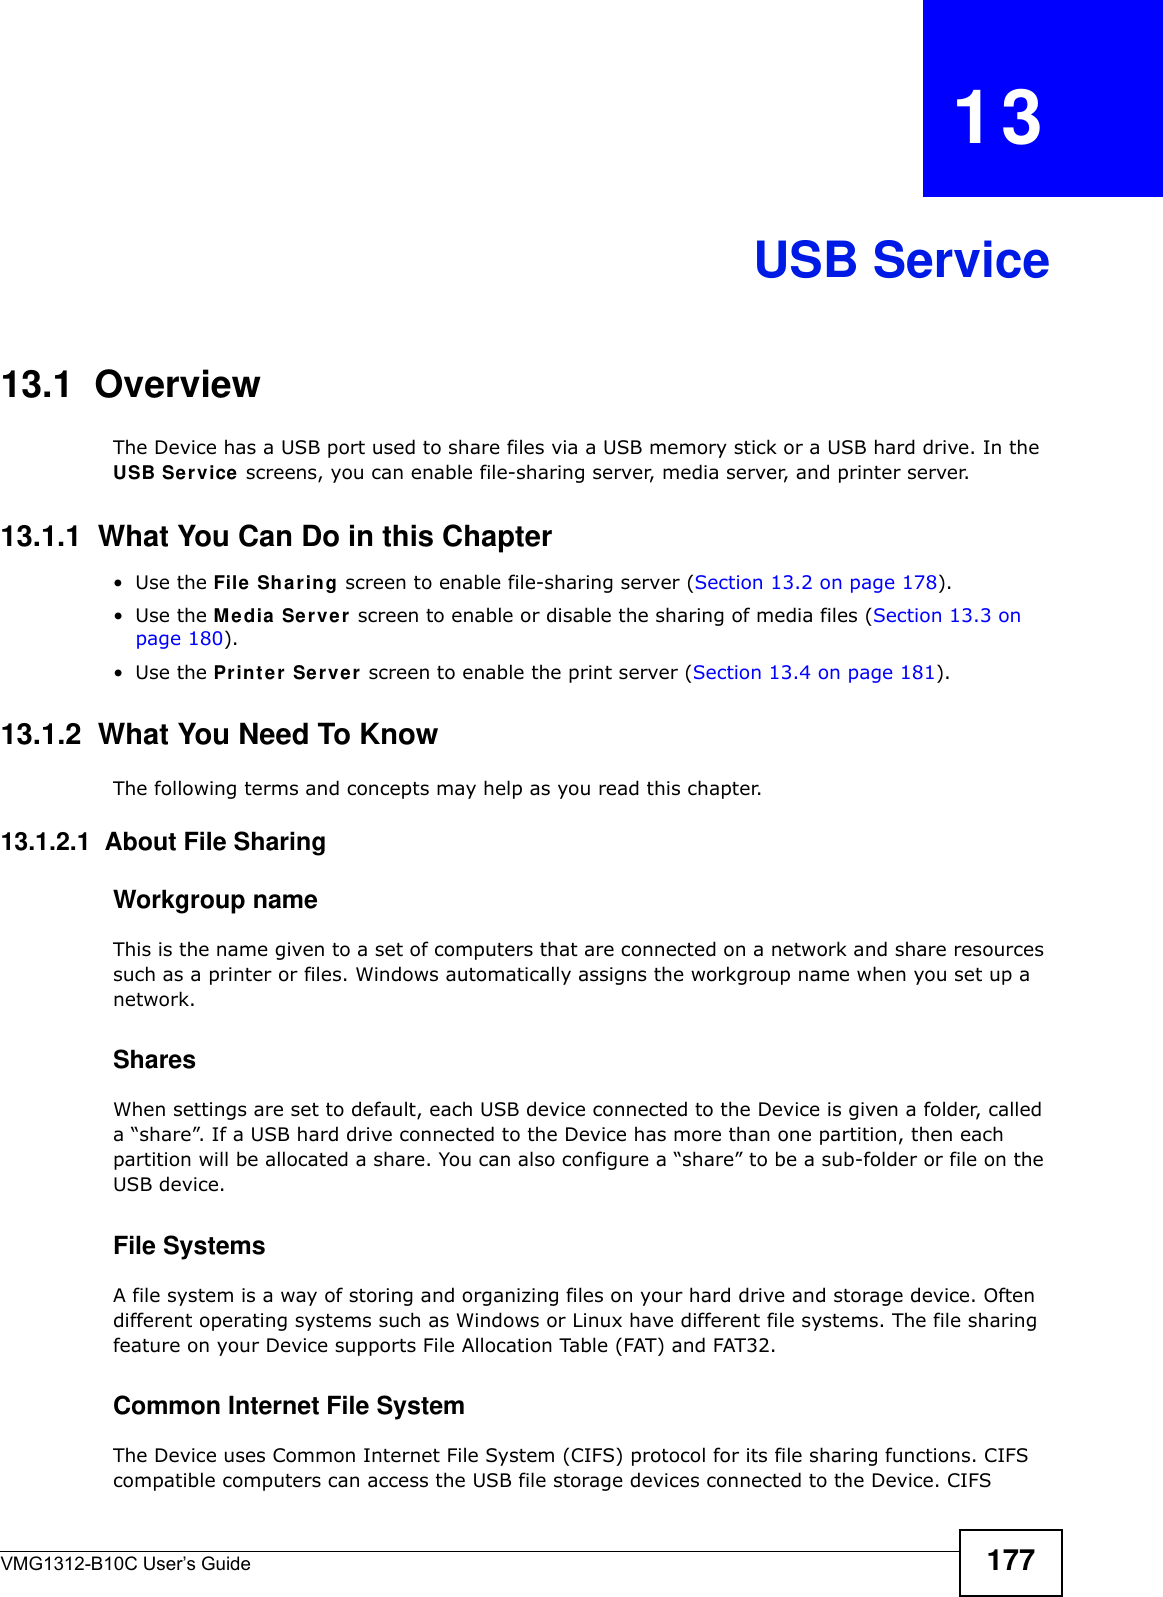 VMG1312-B10C User’s Guide 177CHAPTER   13USB Service13.1  Overview The Device has a USB port used to share files via a USB memory stick or a USB hard drive. In the USB Se r v ice  screens, you can enable file-sharing server, media server, and printer server.13.1.1  What You Can Do in this Chapter•Use the File  Sh a ring screen to enable file-sharing server (Section 13.2 on page 178). •Use the Media  Se r ve r  screen to enable or disable the sharing of media files (Section 13.3 on page 180).•Use the Pr int er Server  screen to enable the print server (Section 13.4 on page 181).13.1.2  What You Need To KnowThe following terms and concepts may help as you read this chapter.13.1.2.1  About File SharingWorkgroup nameThis is the name given to a set of computers that are connected on a network and share resources such as a printer or files. Windows automatically assigns the workgroup name when you set up a network. SharesWhen settings are set to default, each USB device connected to the Device is given a folder, called a “share”. If a USB hard drive connected to the Device has more than one partition, then each partition will be allocated a share. You can also configure a “share” to be a sub-folder or file on the USB device.File SystemsA file system is a way of storing and organizing files on your hard drive and storage device. Often different operating systems such as Windows or Linux have different file systems. The file sharing feature on your Device supports File Allocation Table (FAT) and FAT32. Common Internet File SystemThe Device uses Common Internet File System (CIFS) protocol for its file sharing functions. CIFS compatible computers can access the USB file storage devices connected to the Device. CIFS 